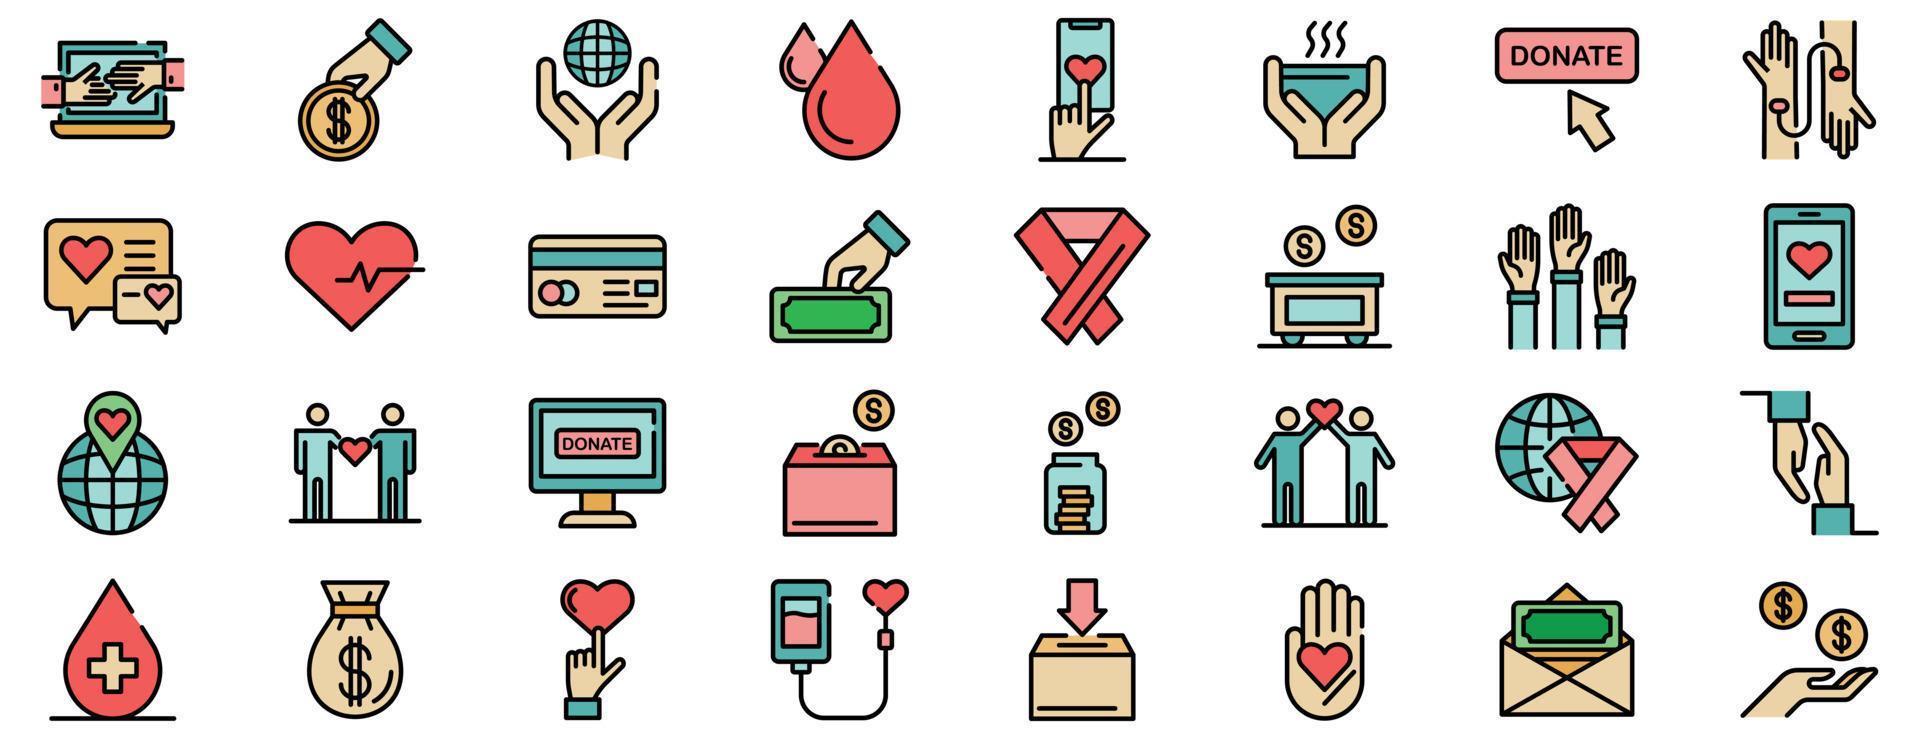 Donations icons vector flat